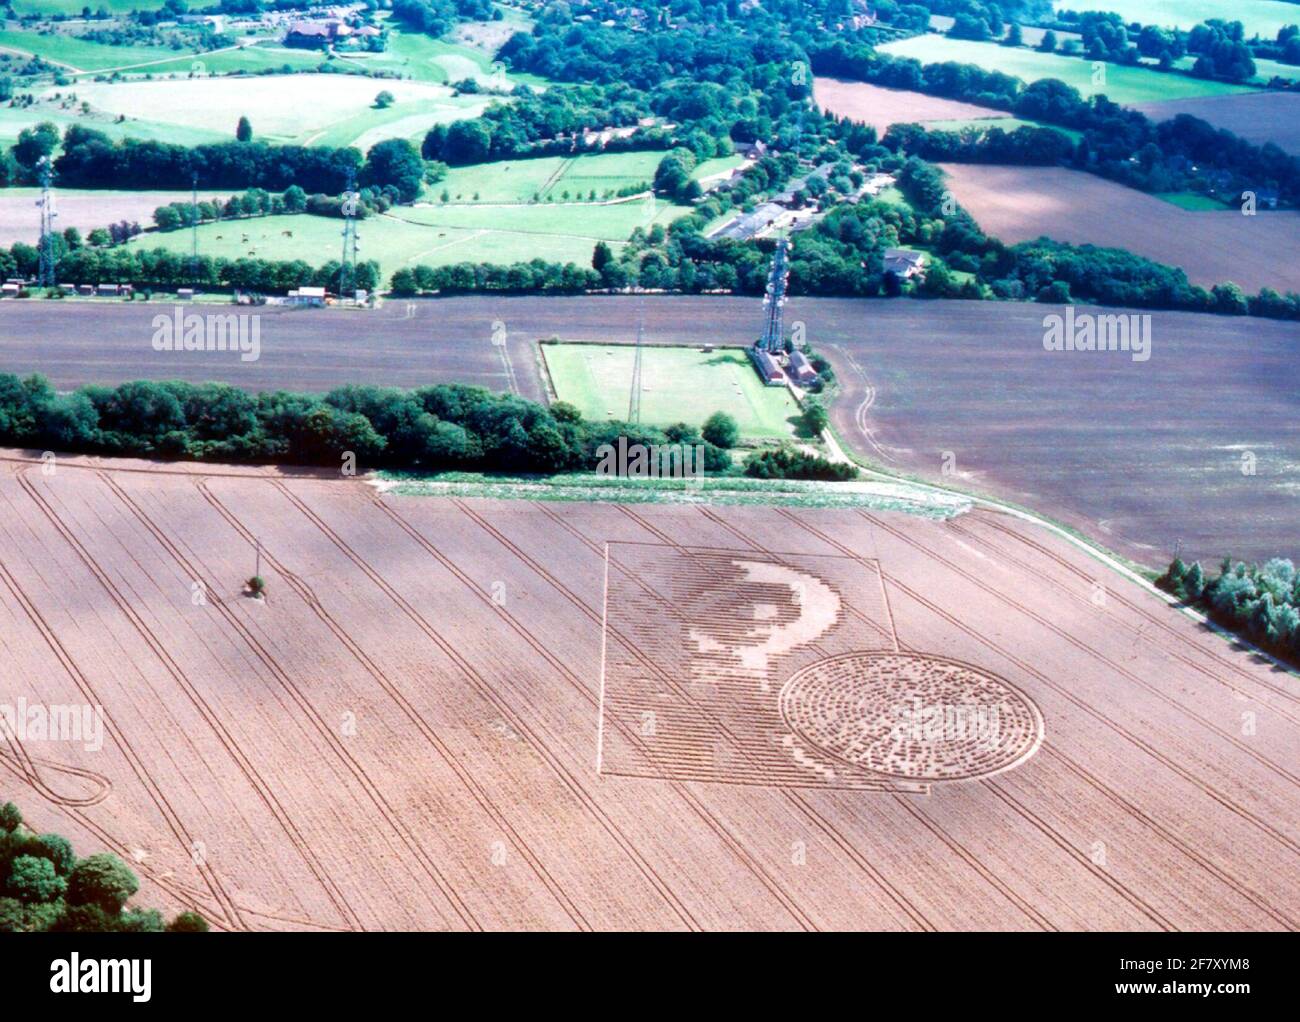 THE FACE OF AN ALIEN ALONGSIDE A COMPUTER DISC AT SPARSHOLT NEAR WINCHESTER. THE CROP DESIGN MEASURING 100 METRES ACROSS IS ALONGSIDETHE SPARSHOLT RADIO MAST ARRAY. PIC MIKE WALKER 2002 Stock Photo